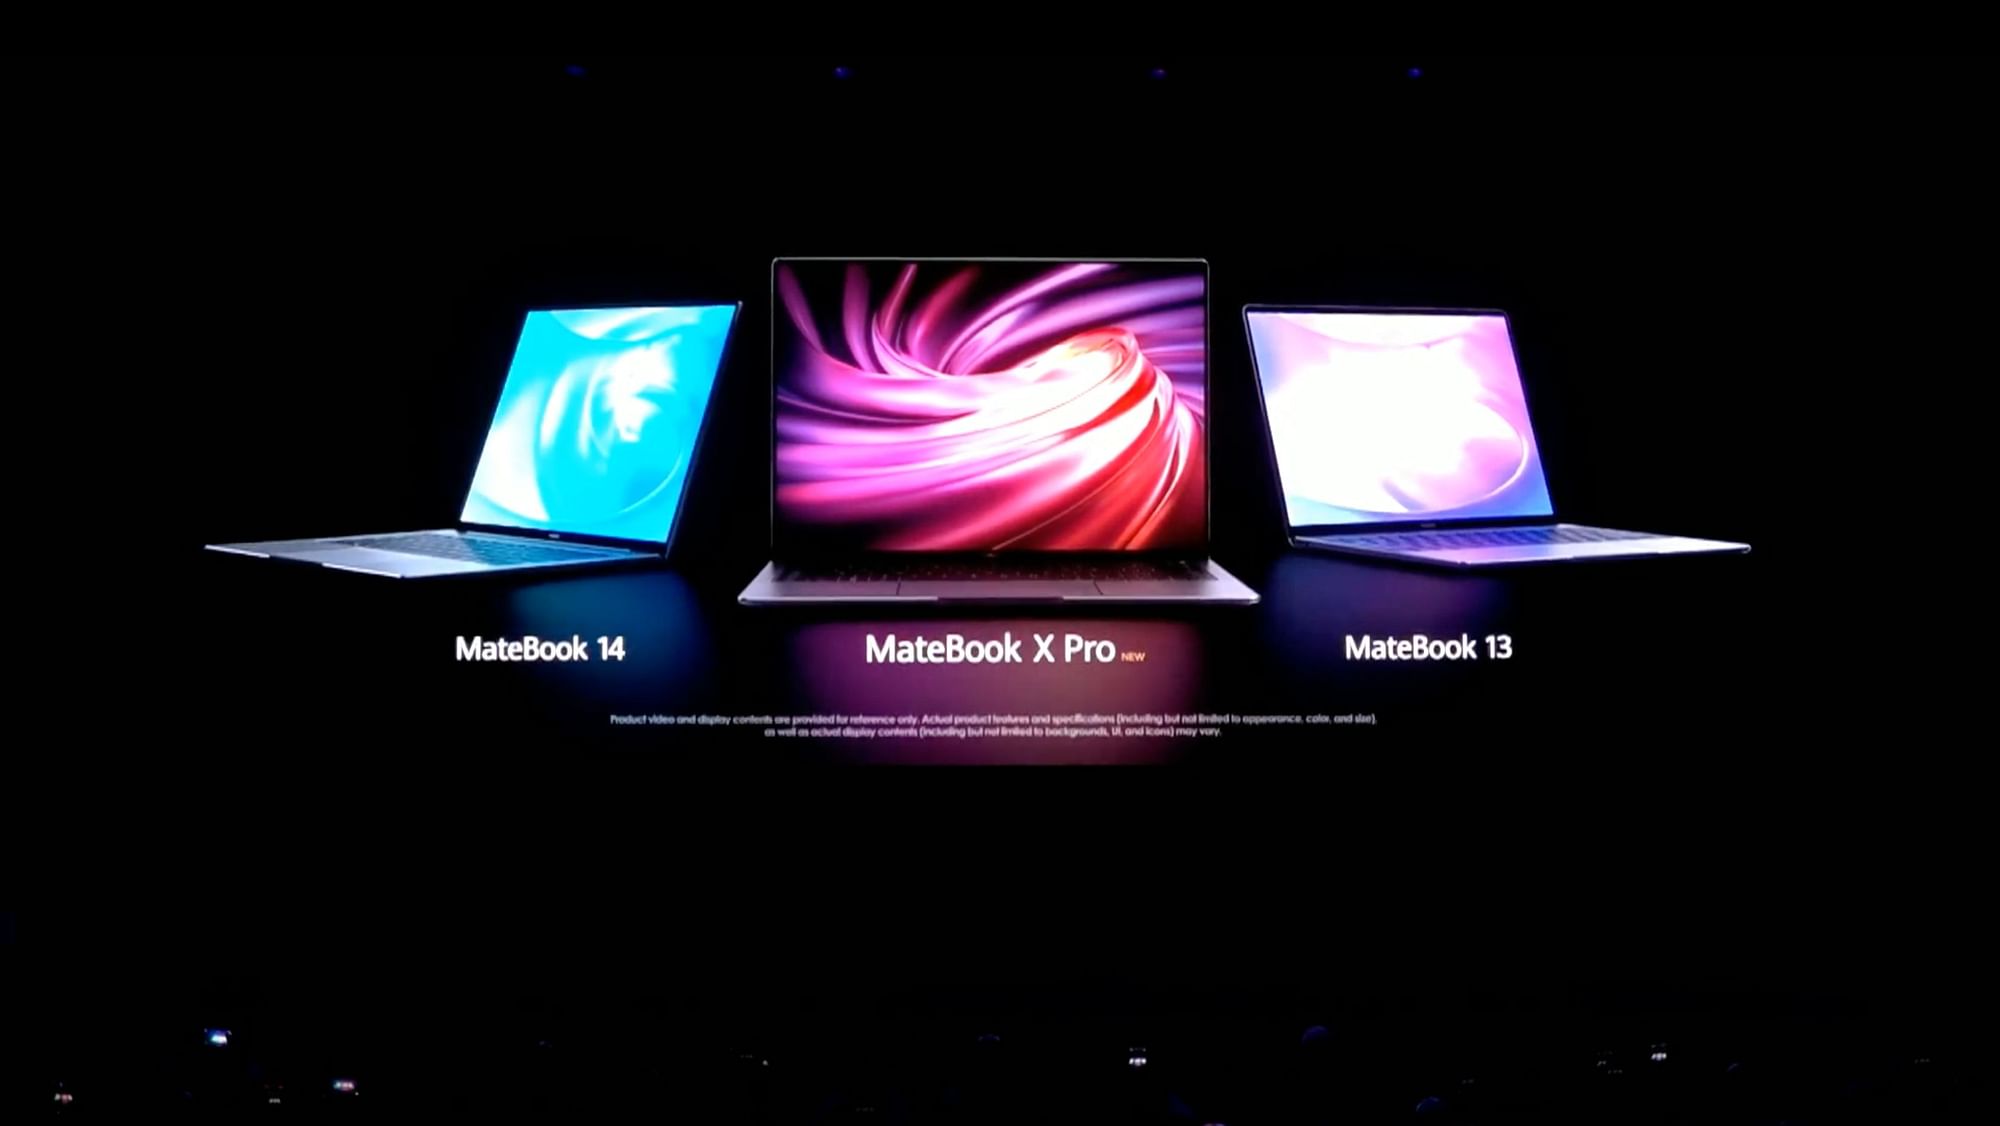 The three new Huawei laptops were announced at the MWC 2019.